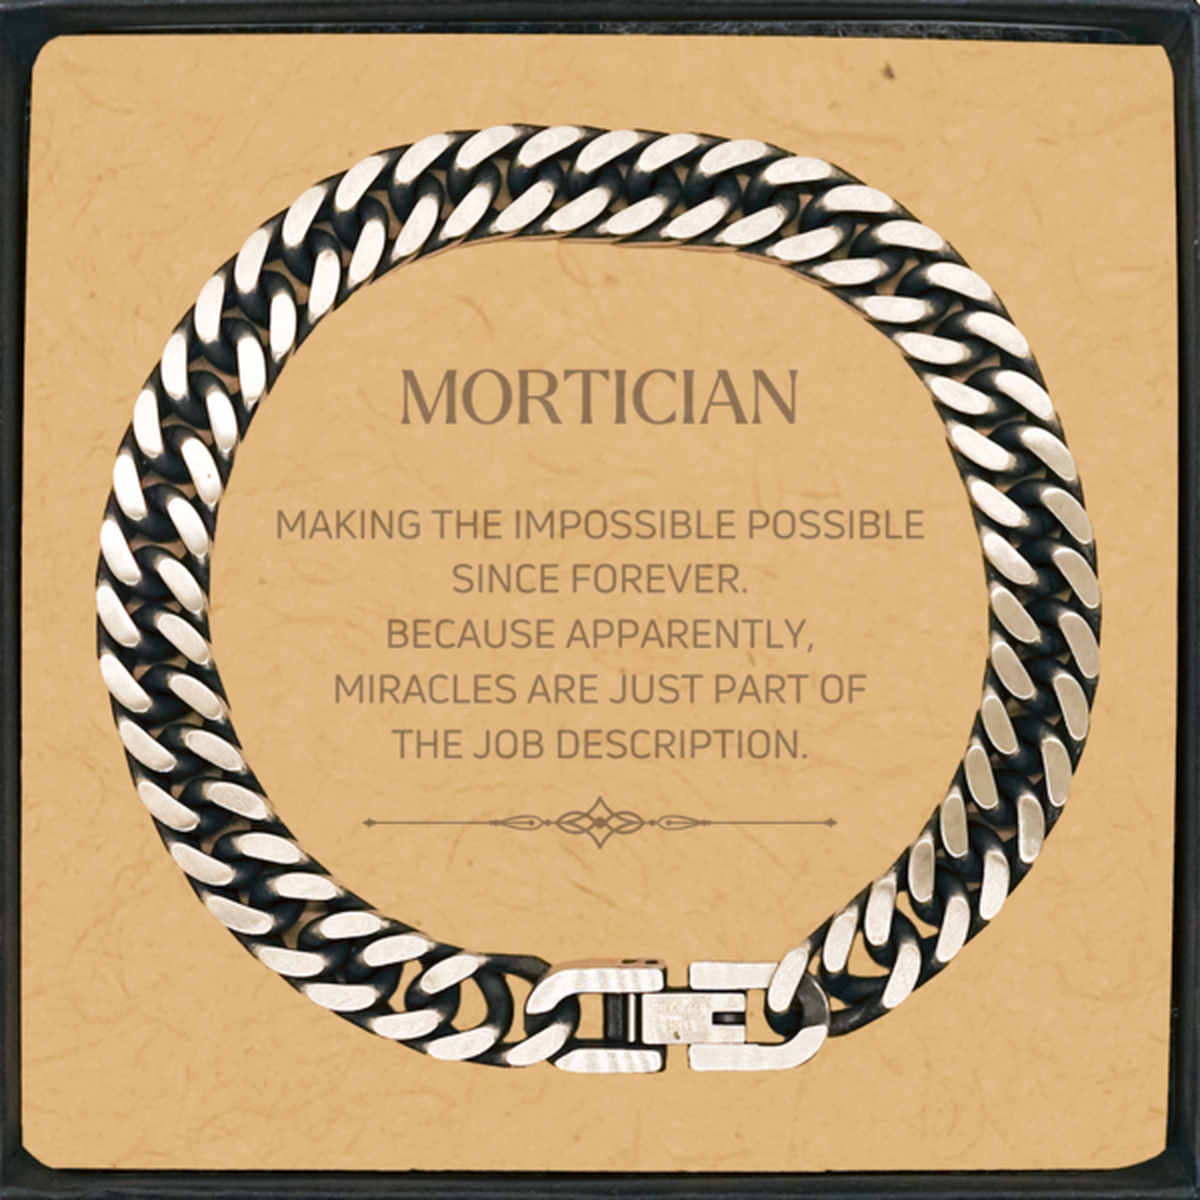 Funny Mortician Gifts, Miracles are just part of the job description, Inspirational Birthday Cuban Link Chain Bracelet For Mortician, Men, Women, Coworkers, Friends, Boss